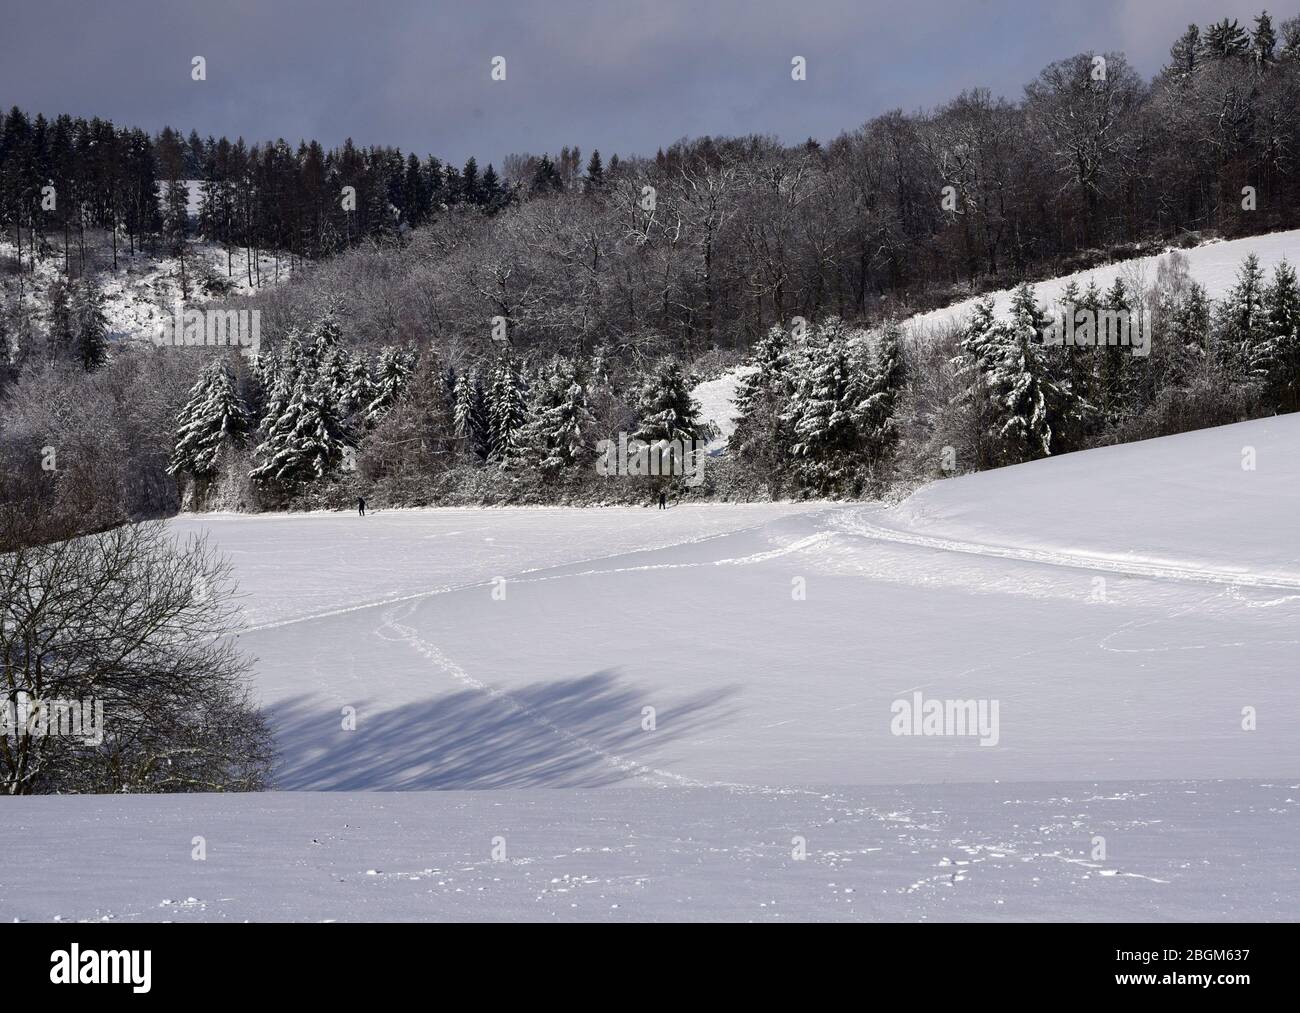 Page 2 - Im Schnee und Winter High Resolution Stock Photography and Images  - Alamy